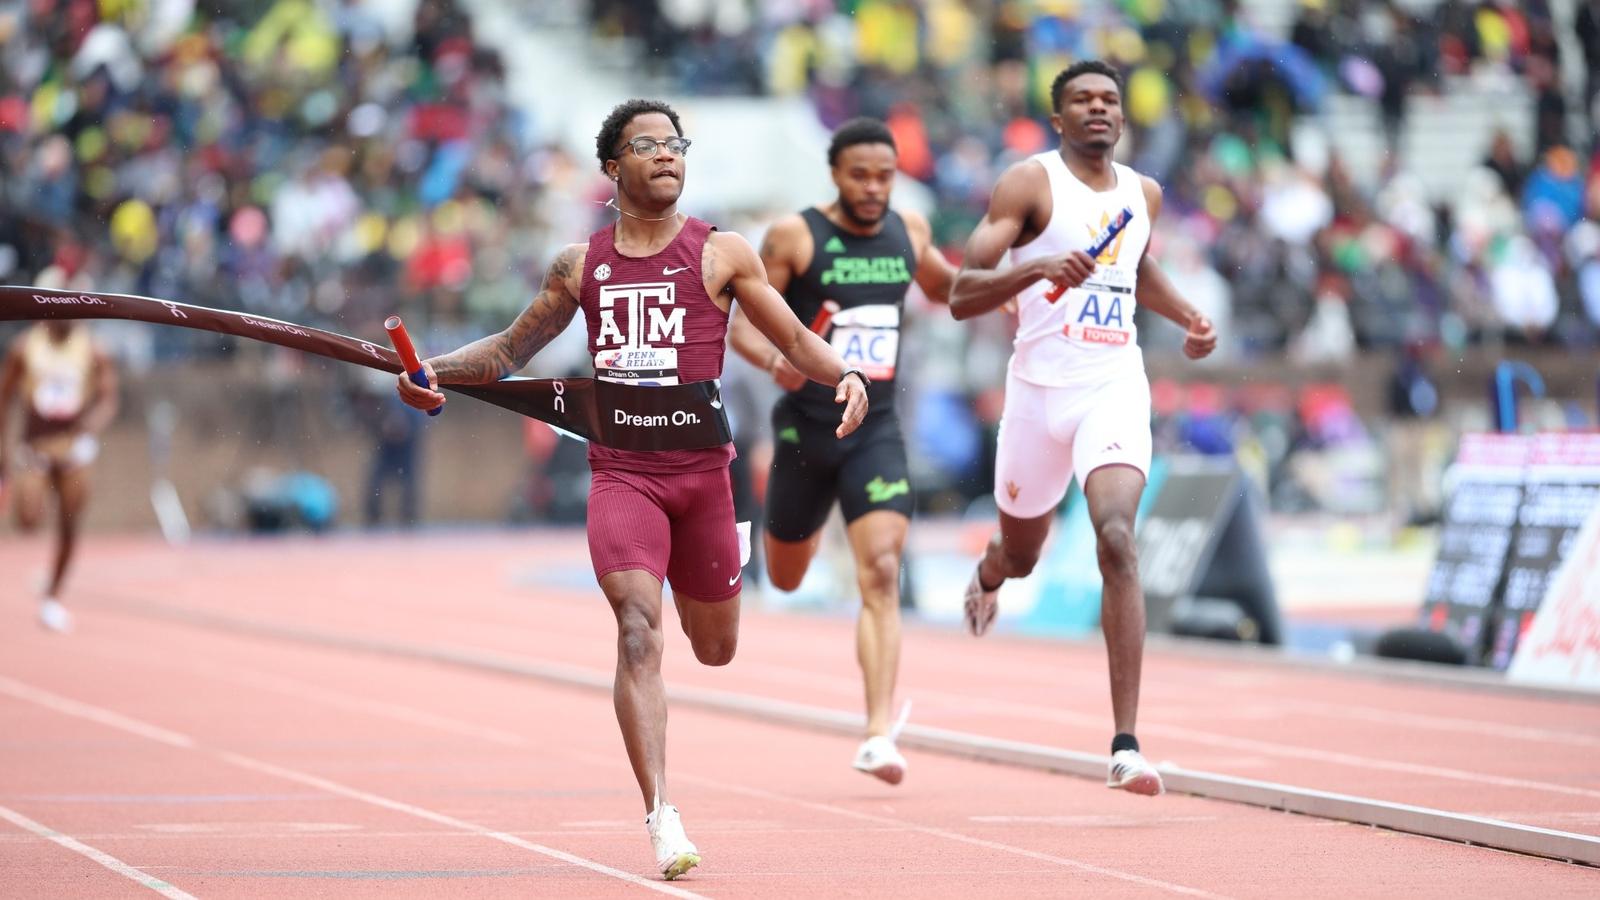 Texas A&M Dominates Penn Relays with Men’s 4x400m and 4x800m Title Wins